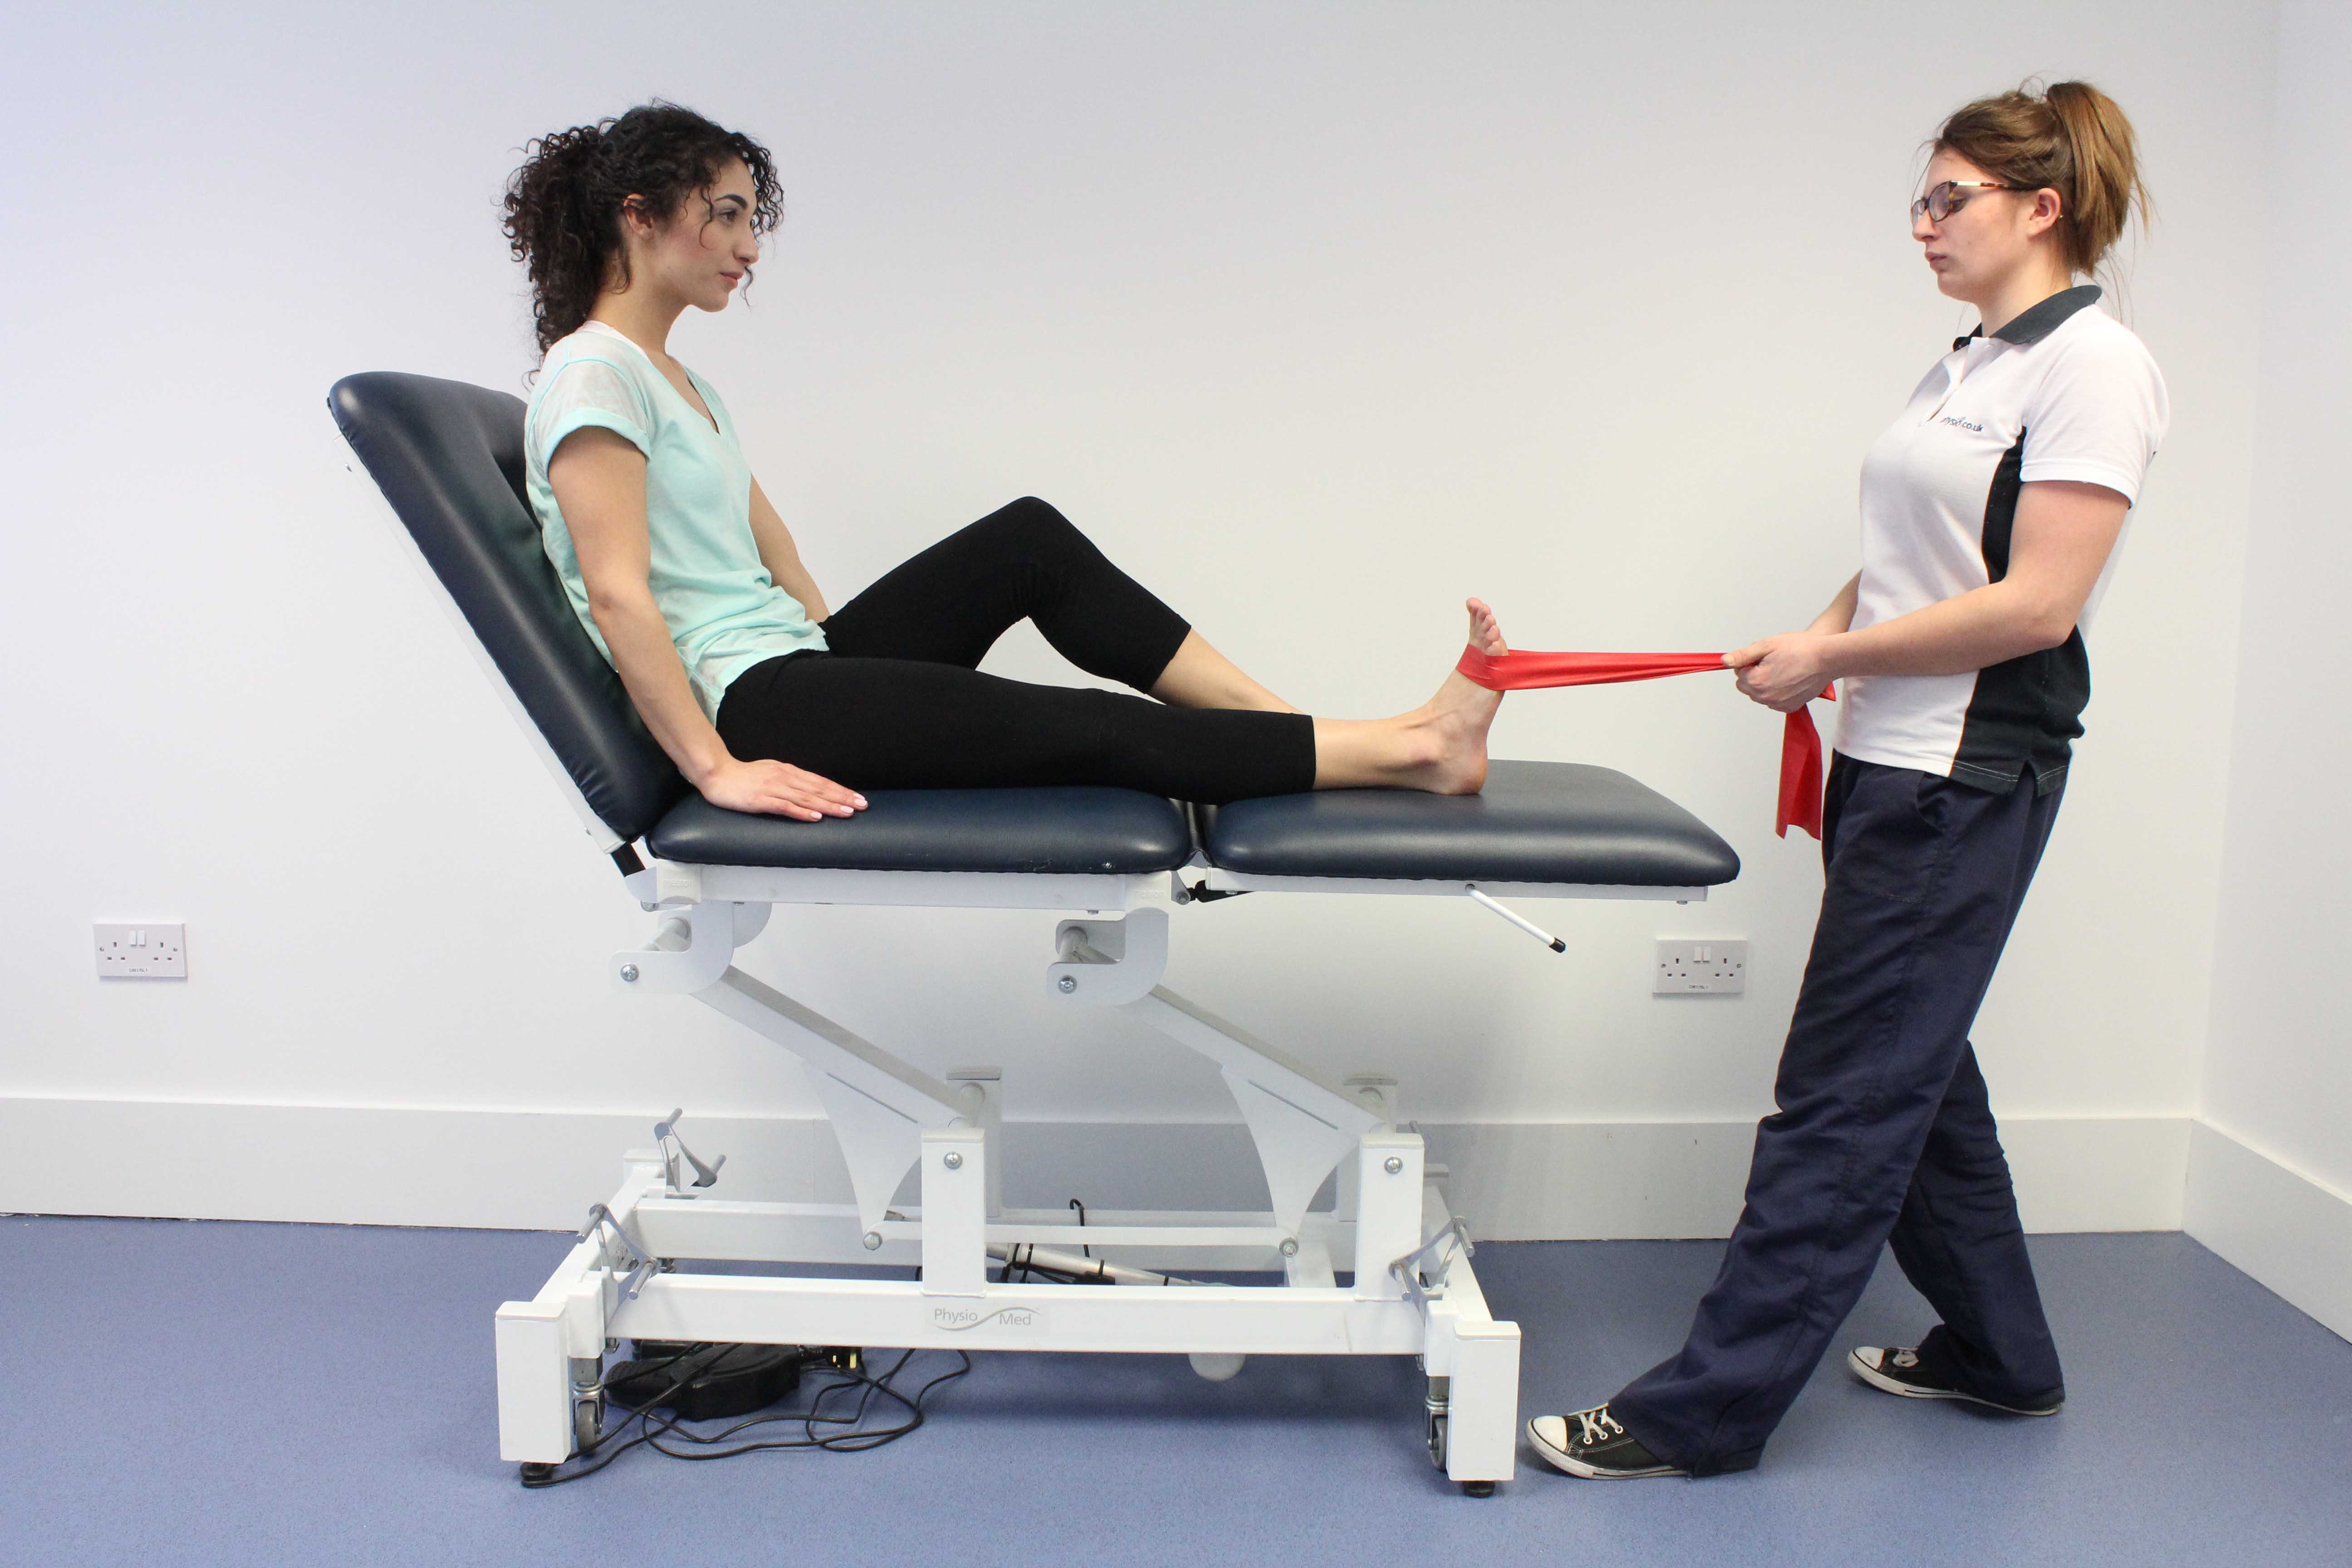 Progressive strengthening exercises for the foot and ankle, assisted by specialist MSK physiotherapist